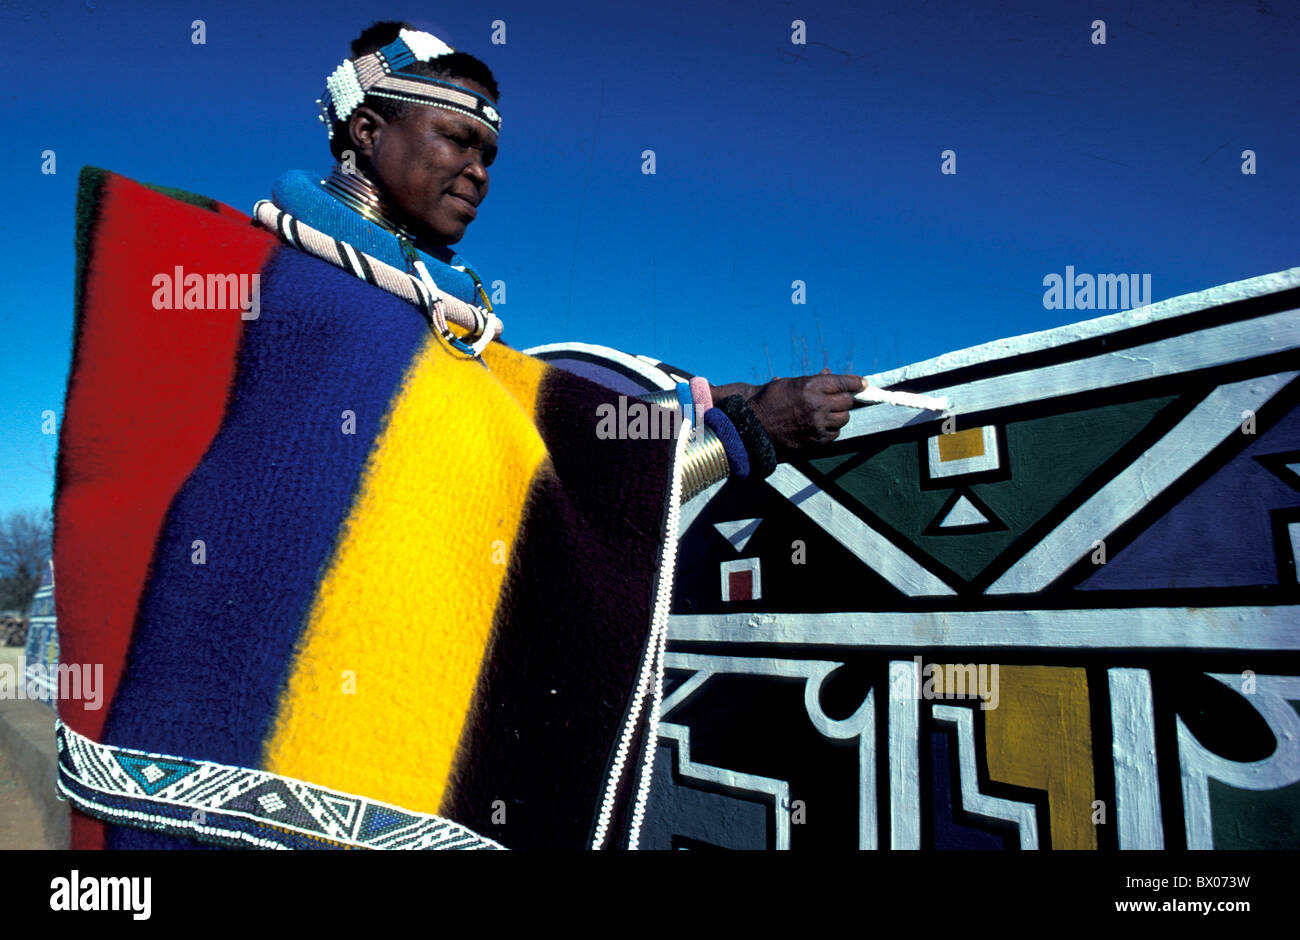 Africa costume jewellery jewelry malend man Ndebele Village no model release painting South Africa Stock Photo